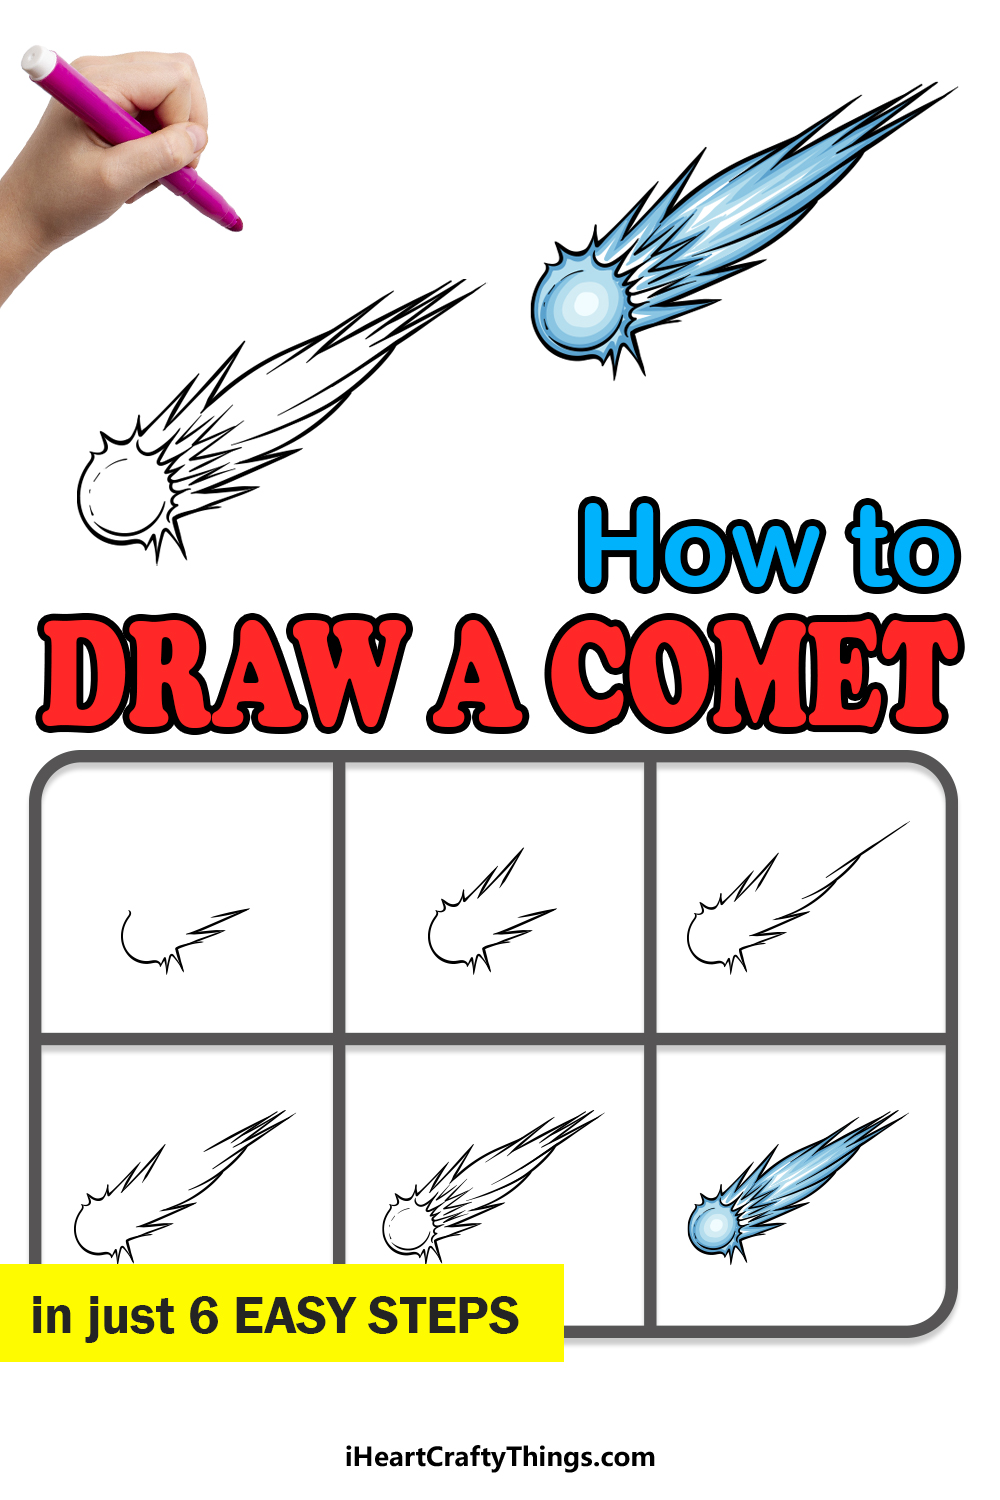 how to draw a comet in 6 easy steps